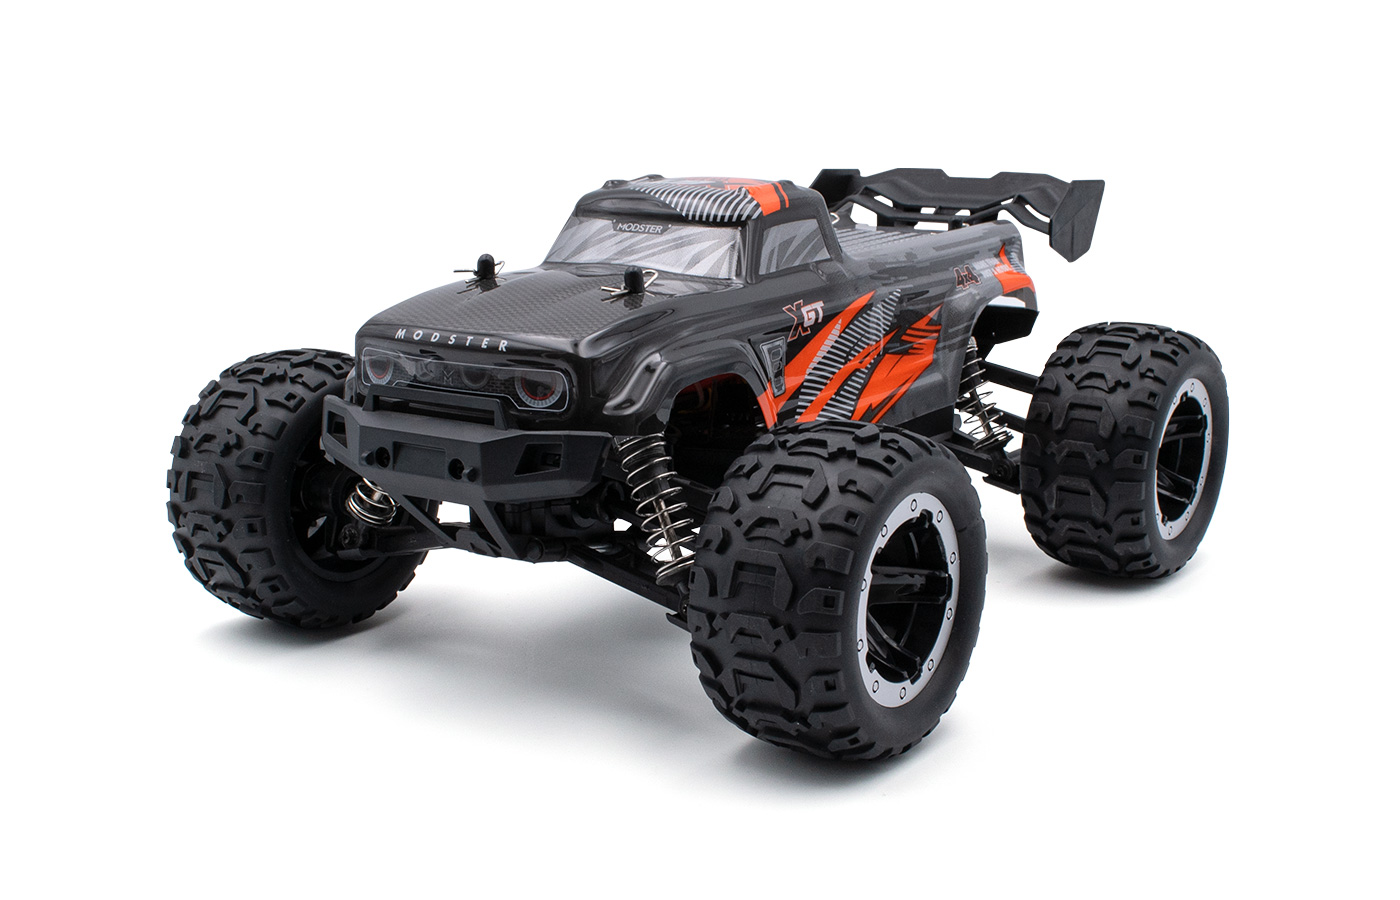 RC-Cars up to 50 km/h speed at Modellsport Schweighofer - Order